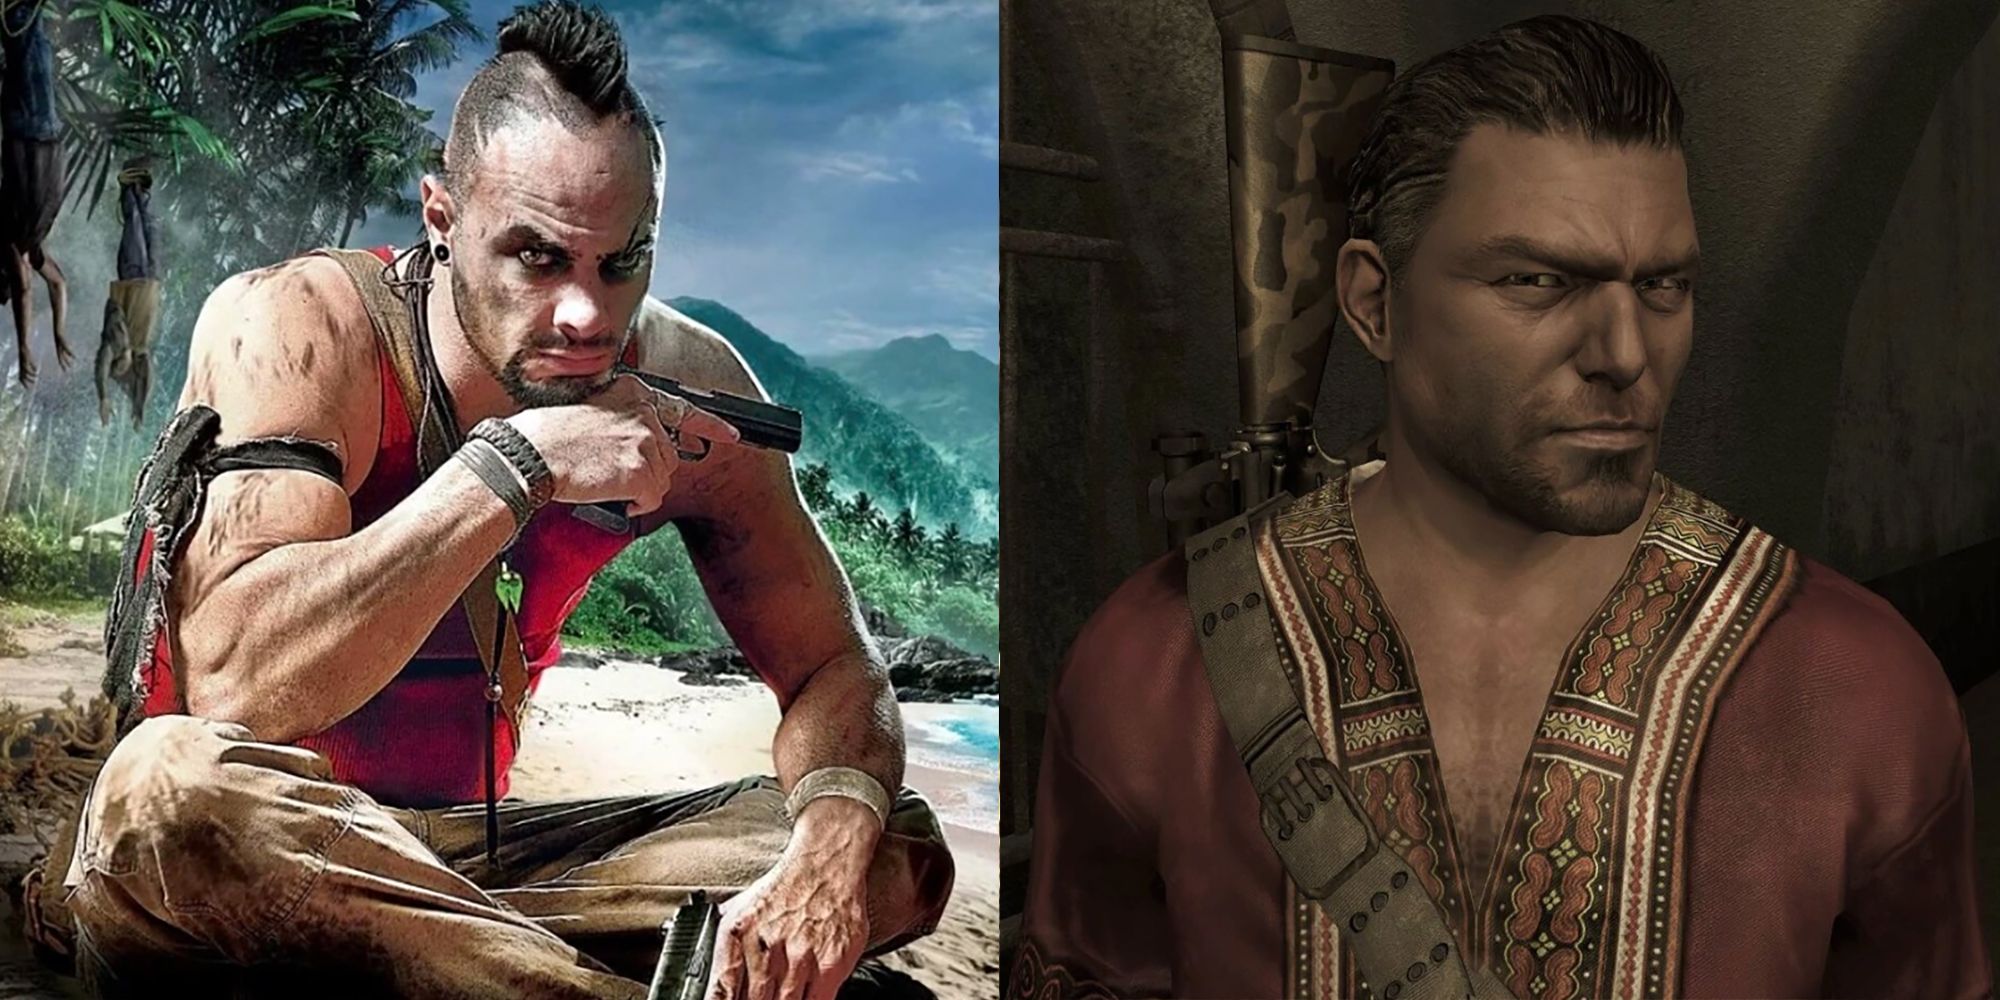 vaas and the jackal from far cry series